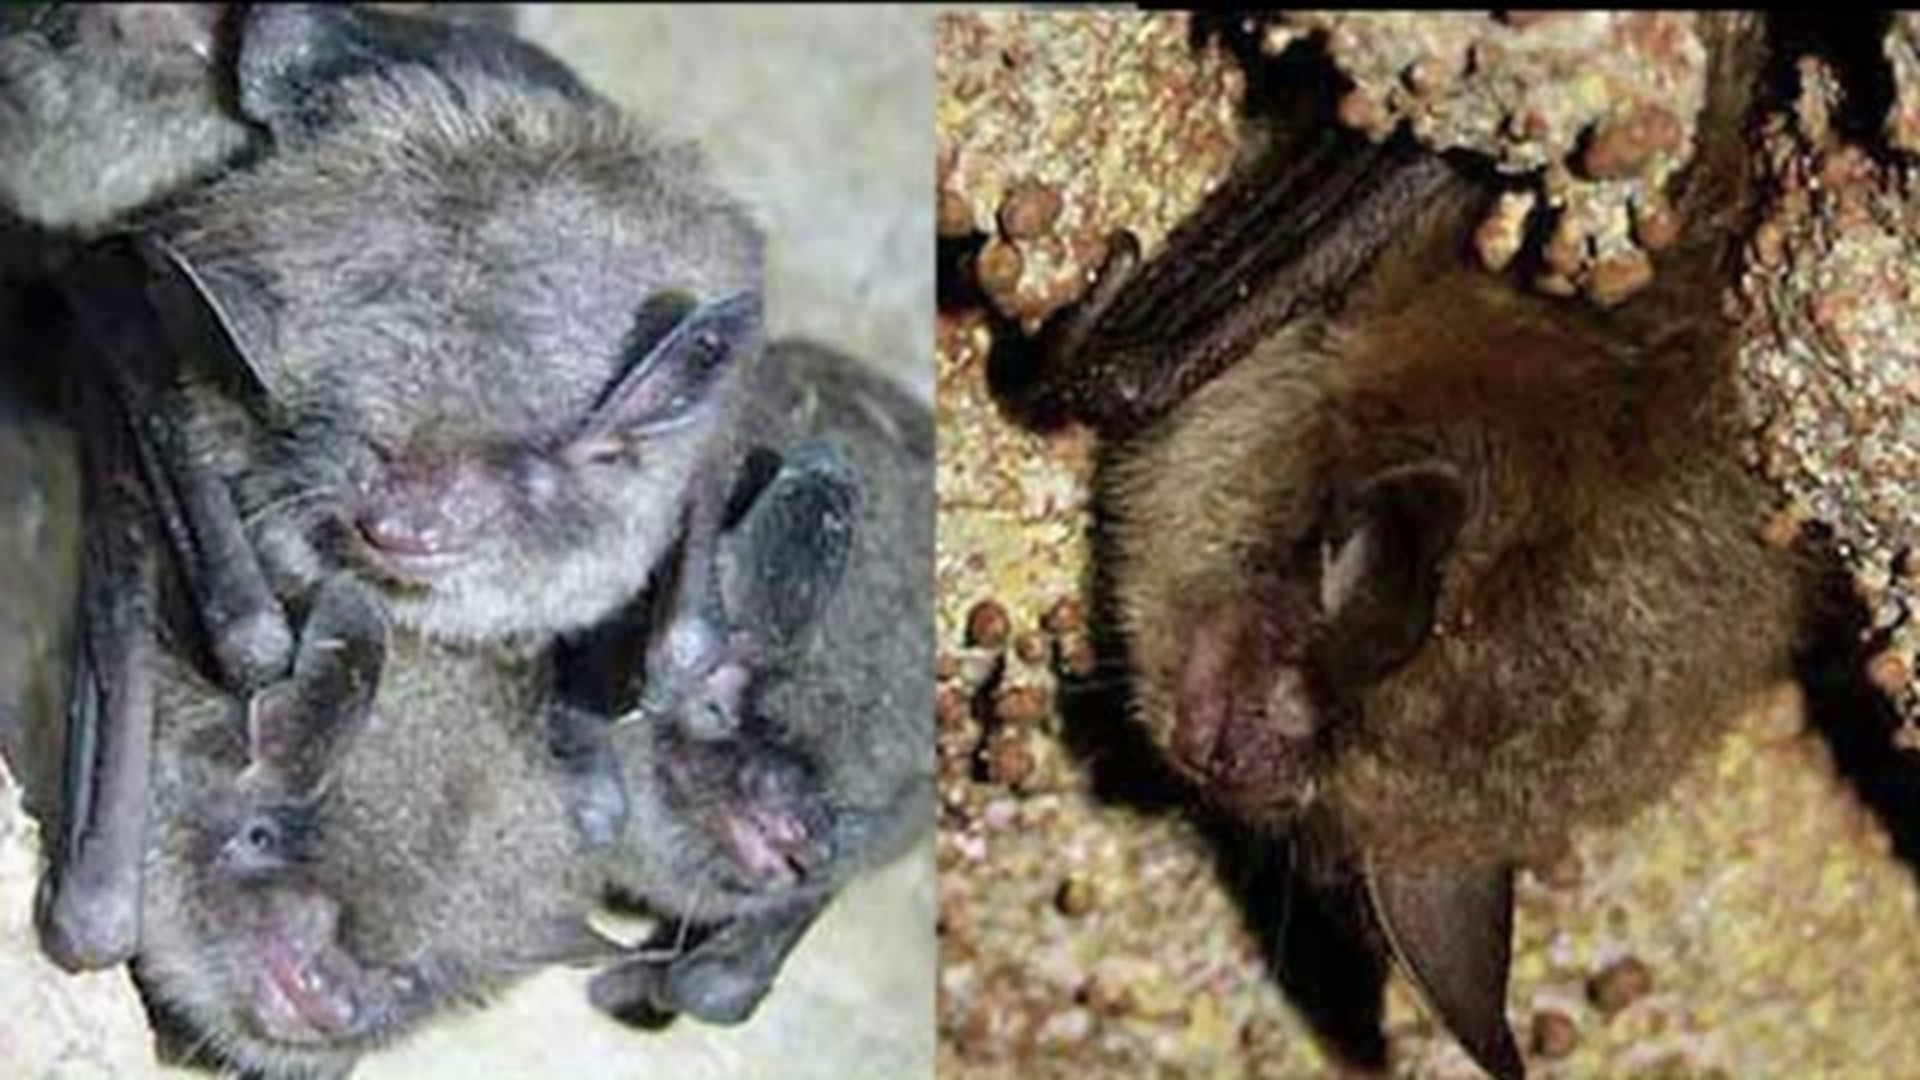 DEP Uncertain How to Fight Mine Fire Because of Bats